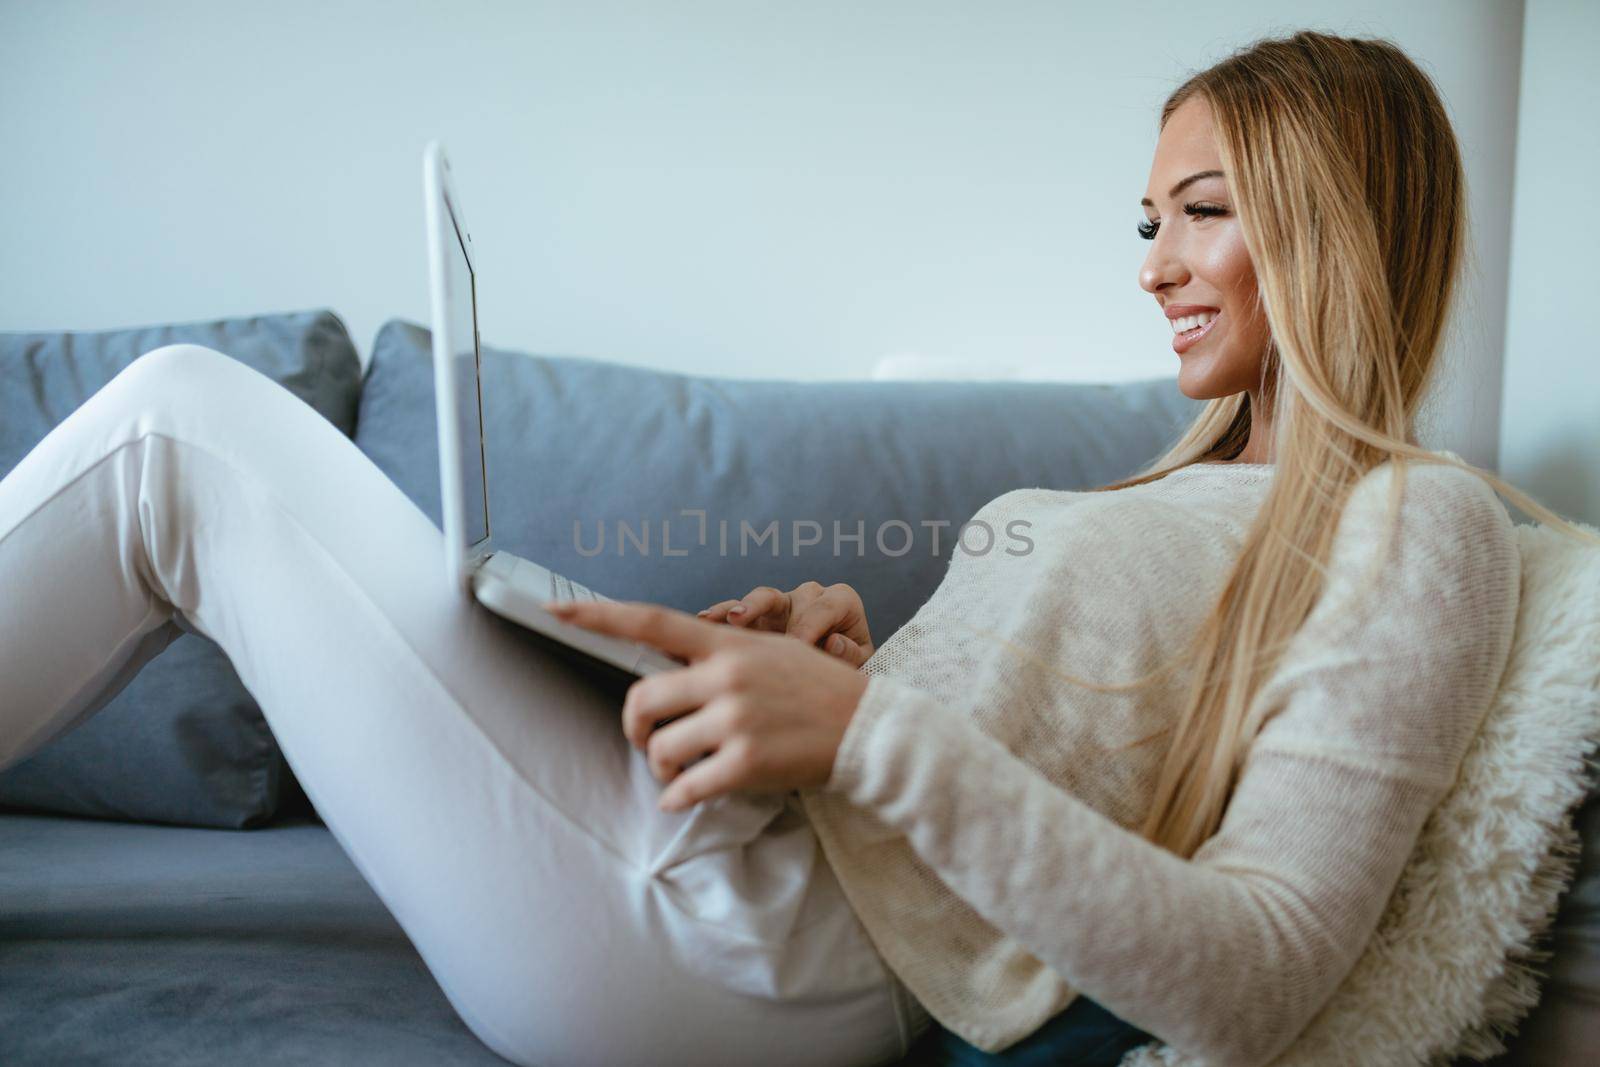 Attractive smiling girl sitting on a bed and using laptop. She is surfing on the net and checking social media.